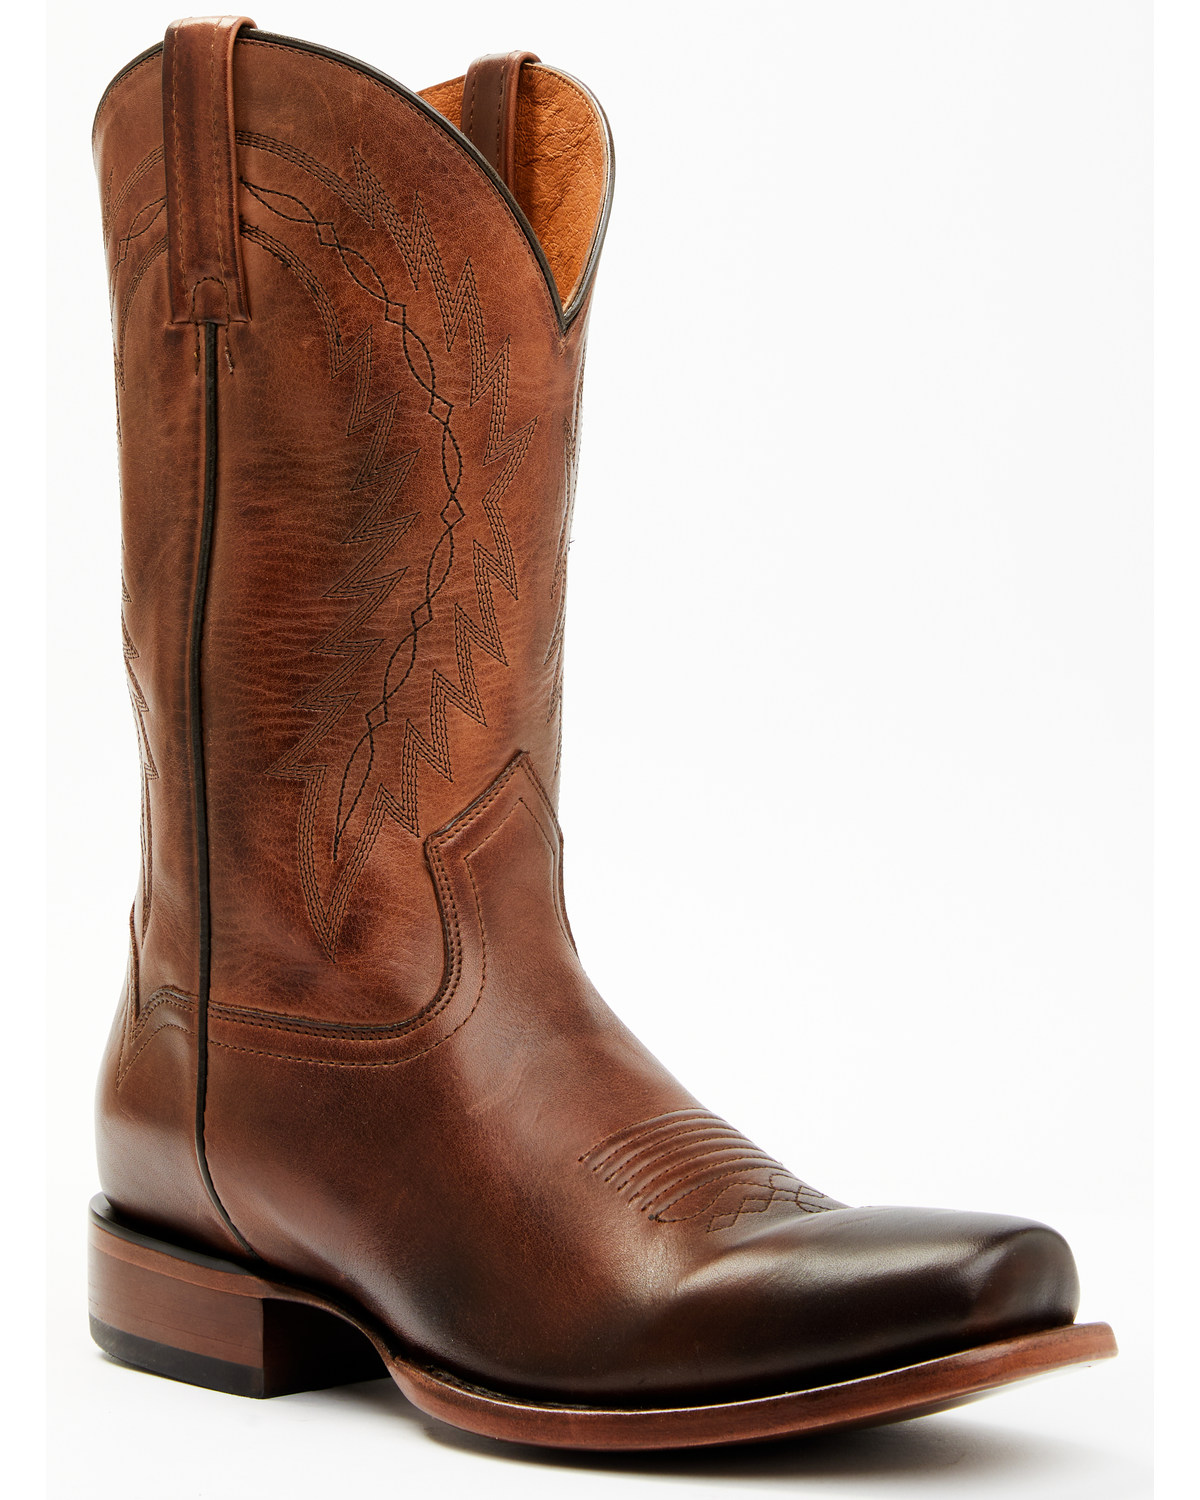 Cody James Men's Handcrafted Western Boots - Square Toe